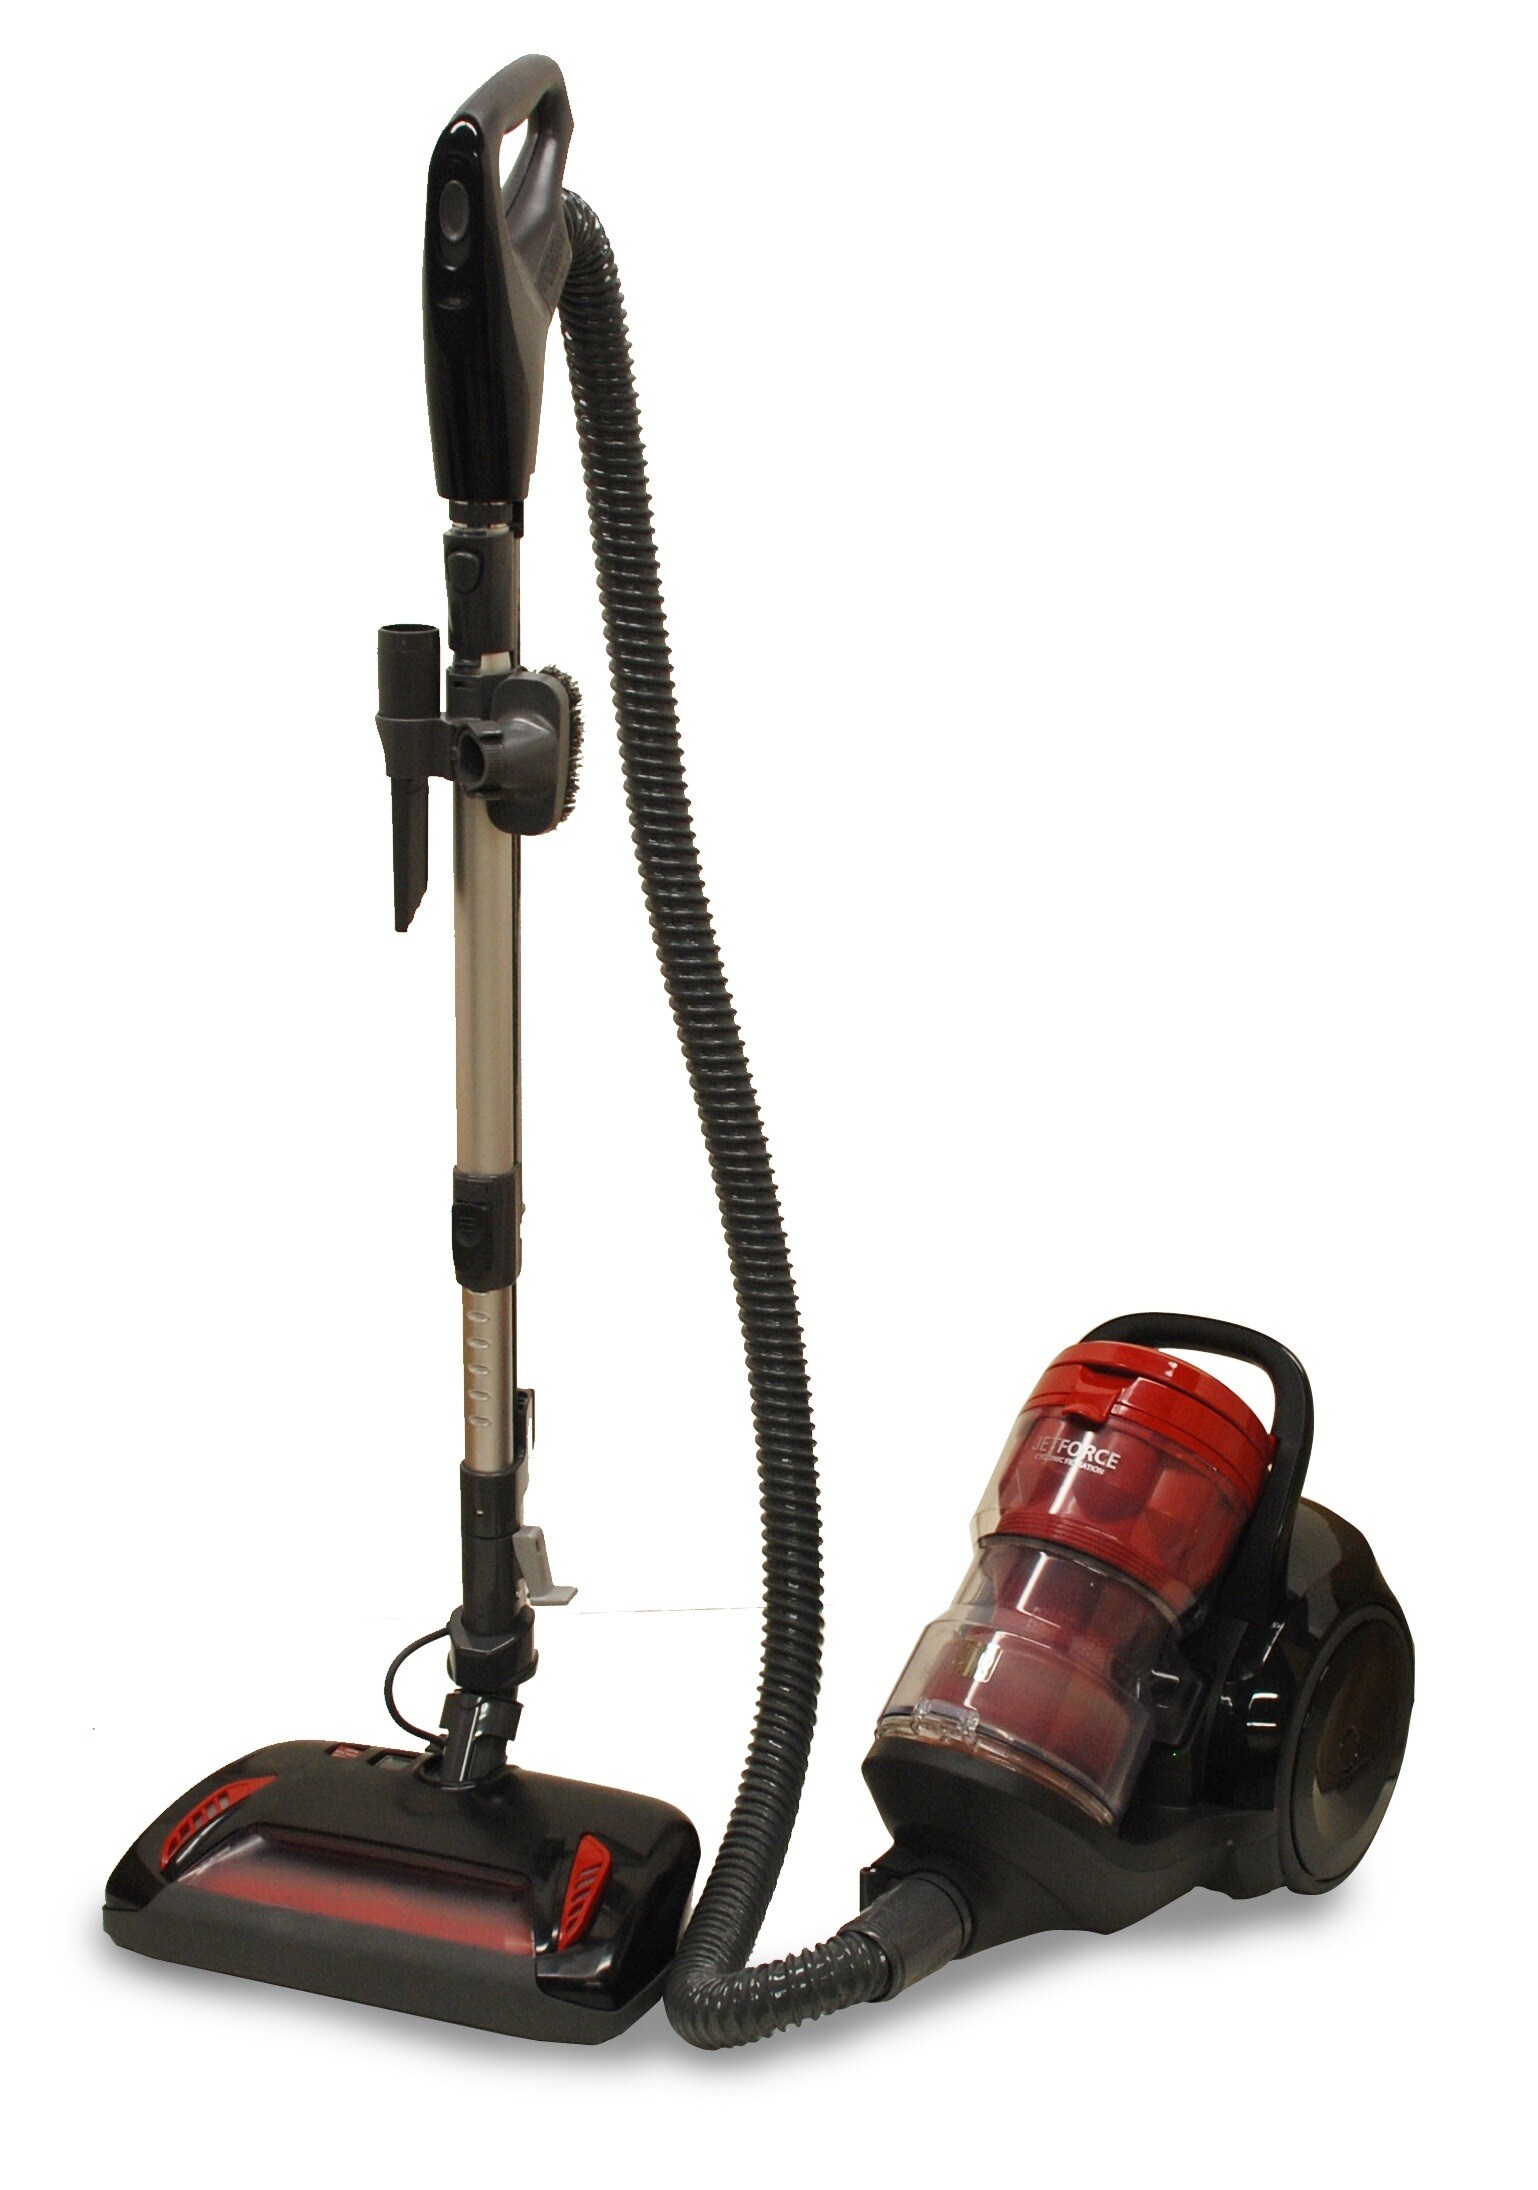 Canister vacuum cleaners. Пылесос Samsung sc20m257awr. Supra vcs-2085. Пылесос Supra vcs-2085. Samsung SC 20m257awr.